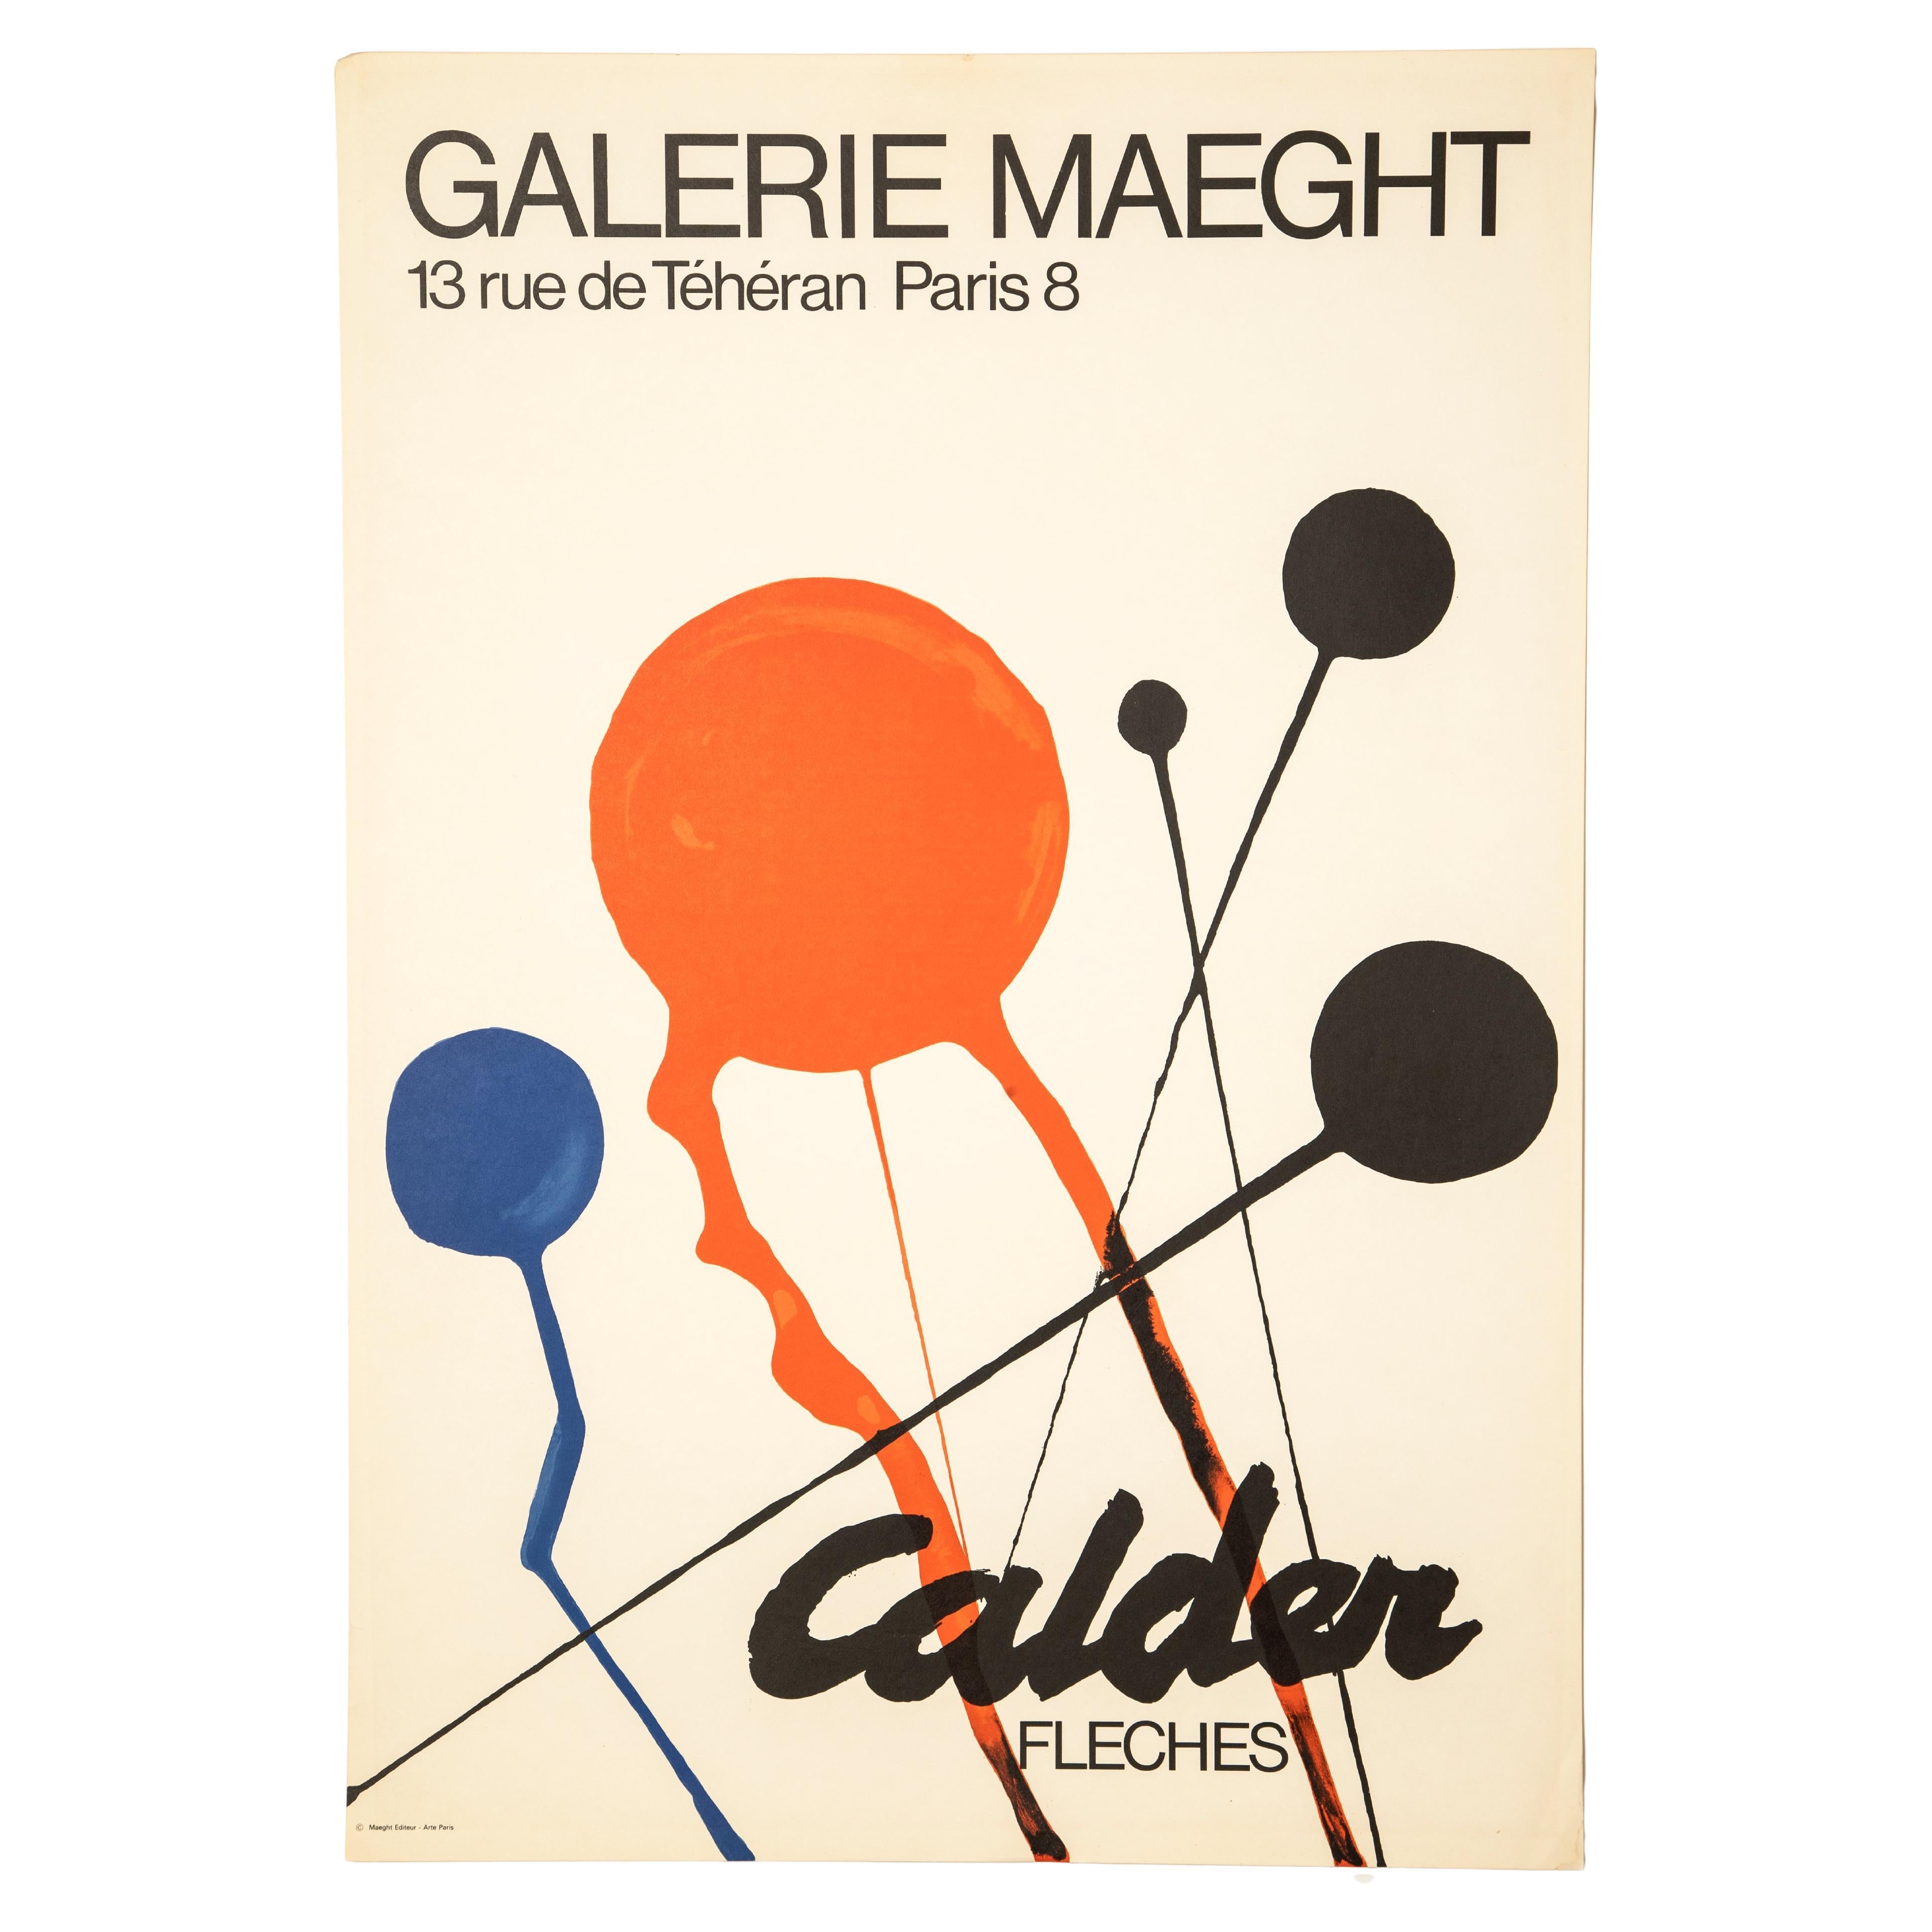 Alexander Calder - Fleches 'Galerie Maeght', 1970 - Lithographic Poster For Sale